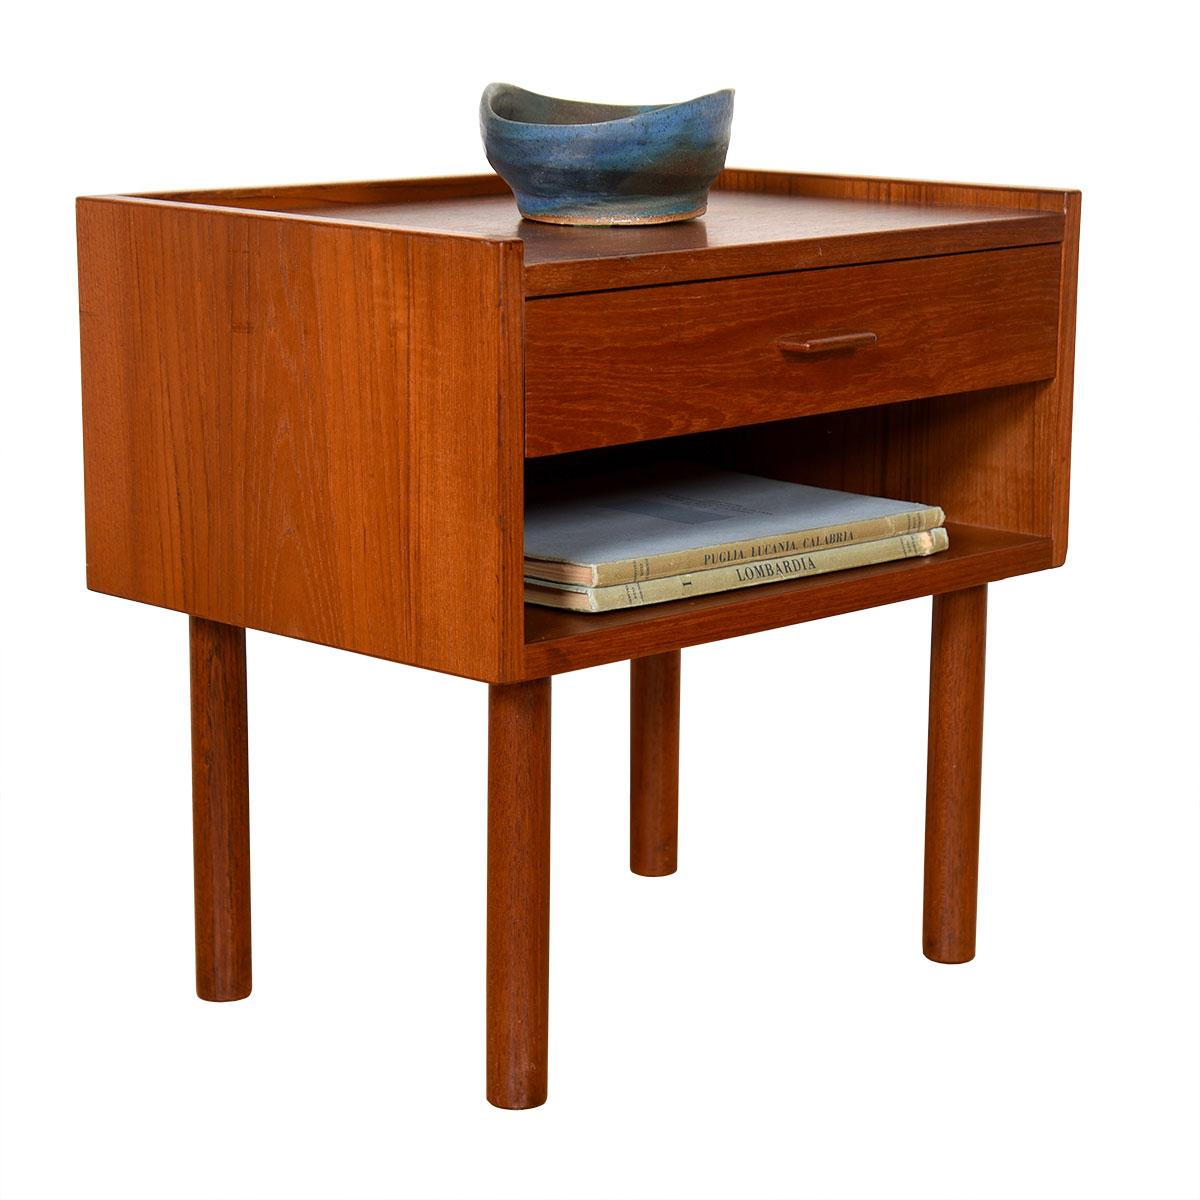 20th Century Danish Teak Nightstand / End Table with Finished Backside by Hans Wegner For Sale